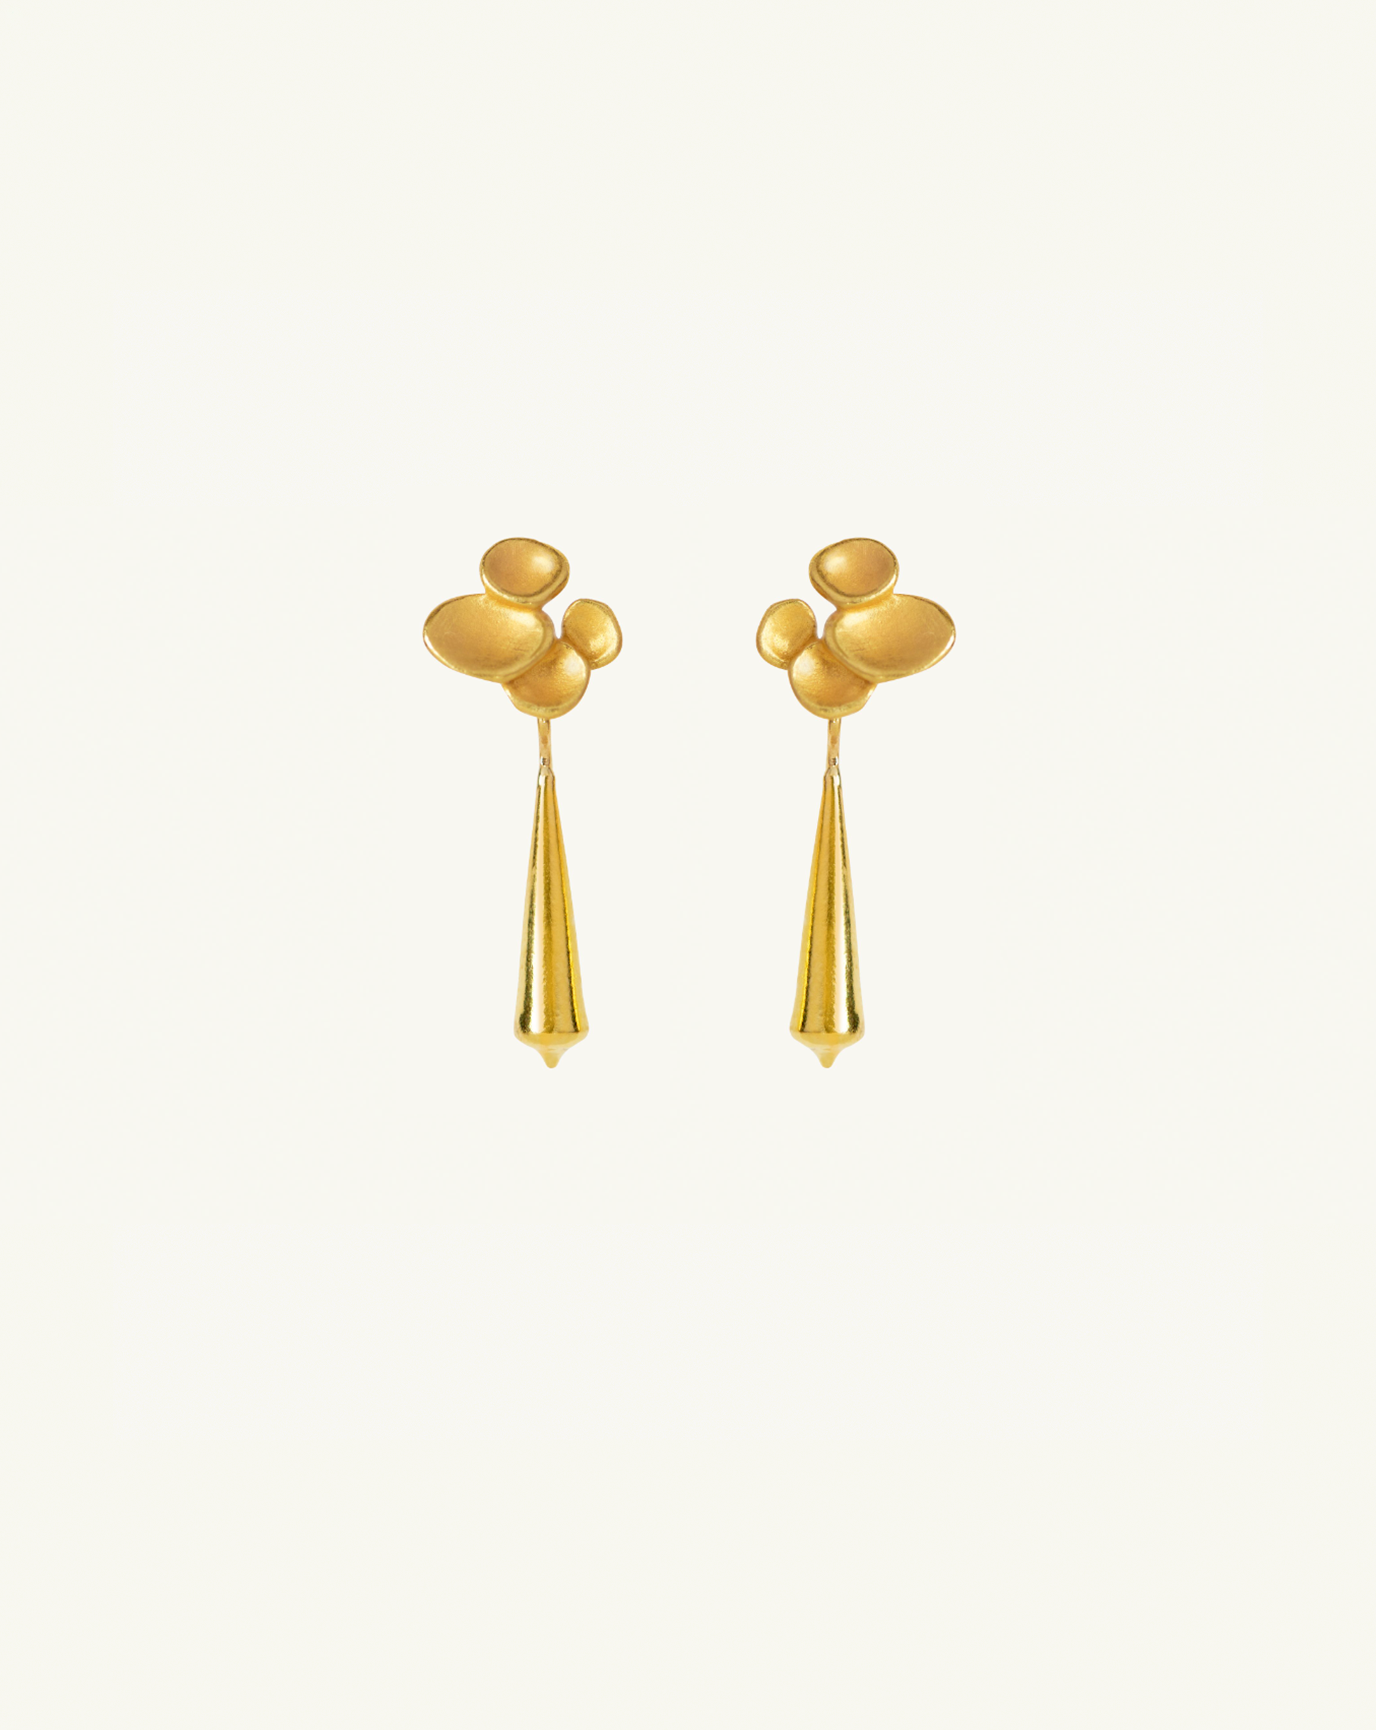 Product image of the tapered gold pod earrings with abstract climber studs attached